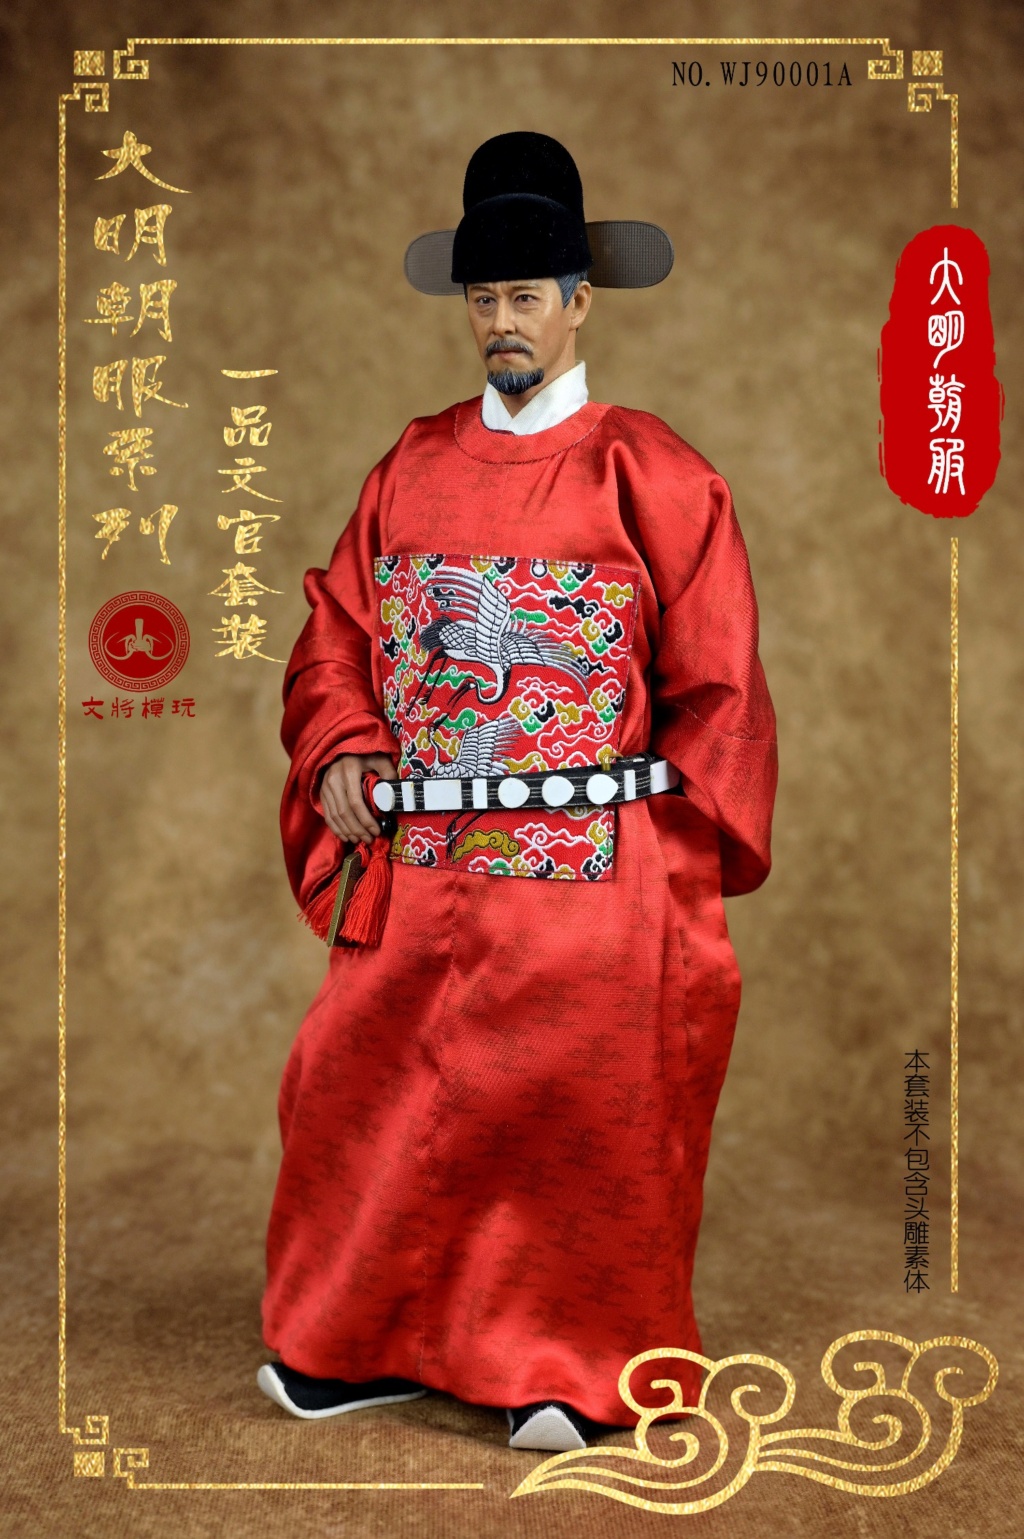 militaryofficer - NEW PRODUCT: Wenjiang Model Play: 1/6 Ming Dynasty Clothes Series - Yipin Civilian/Military Officer Set WJ90001A/B 16473810